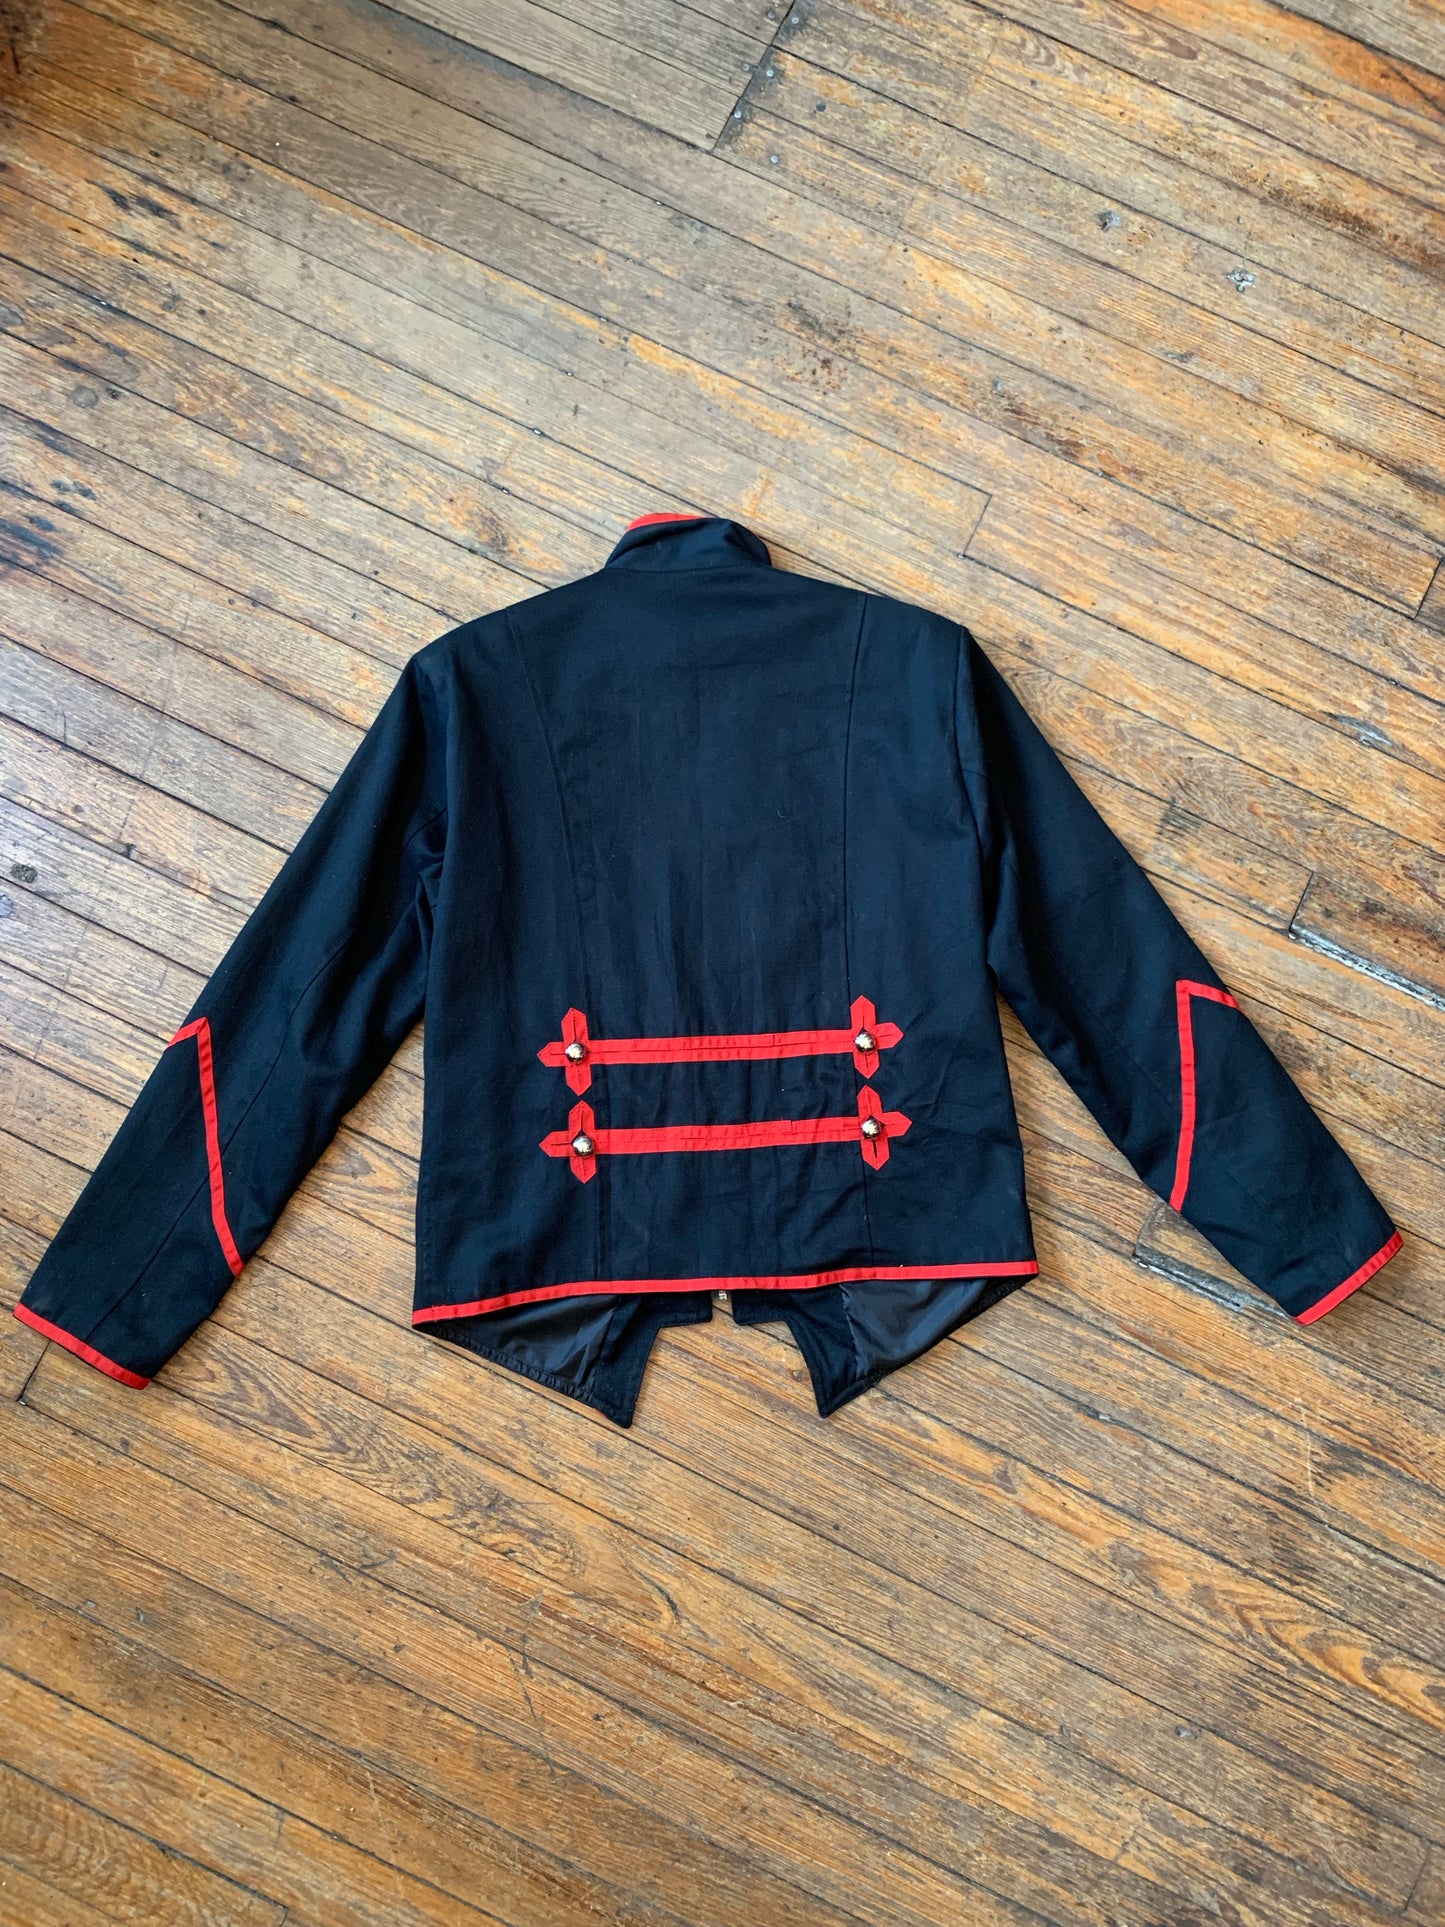 Welcome to the Black Parade Black and Red Military Jacket